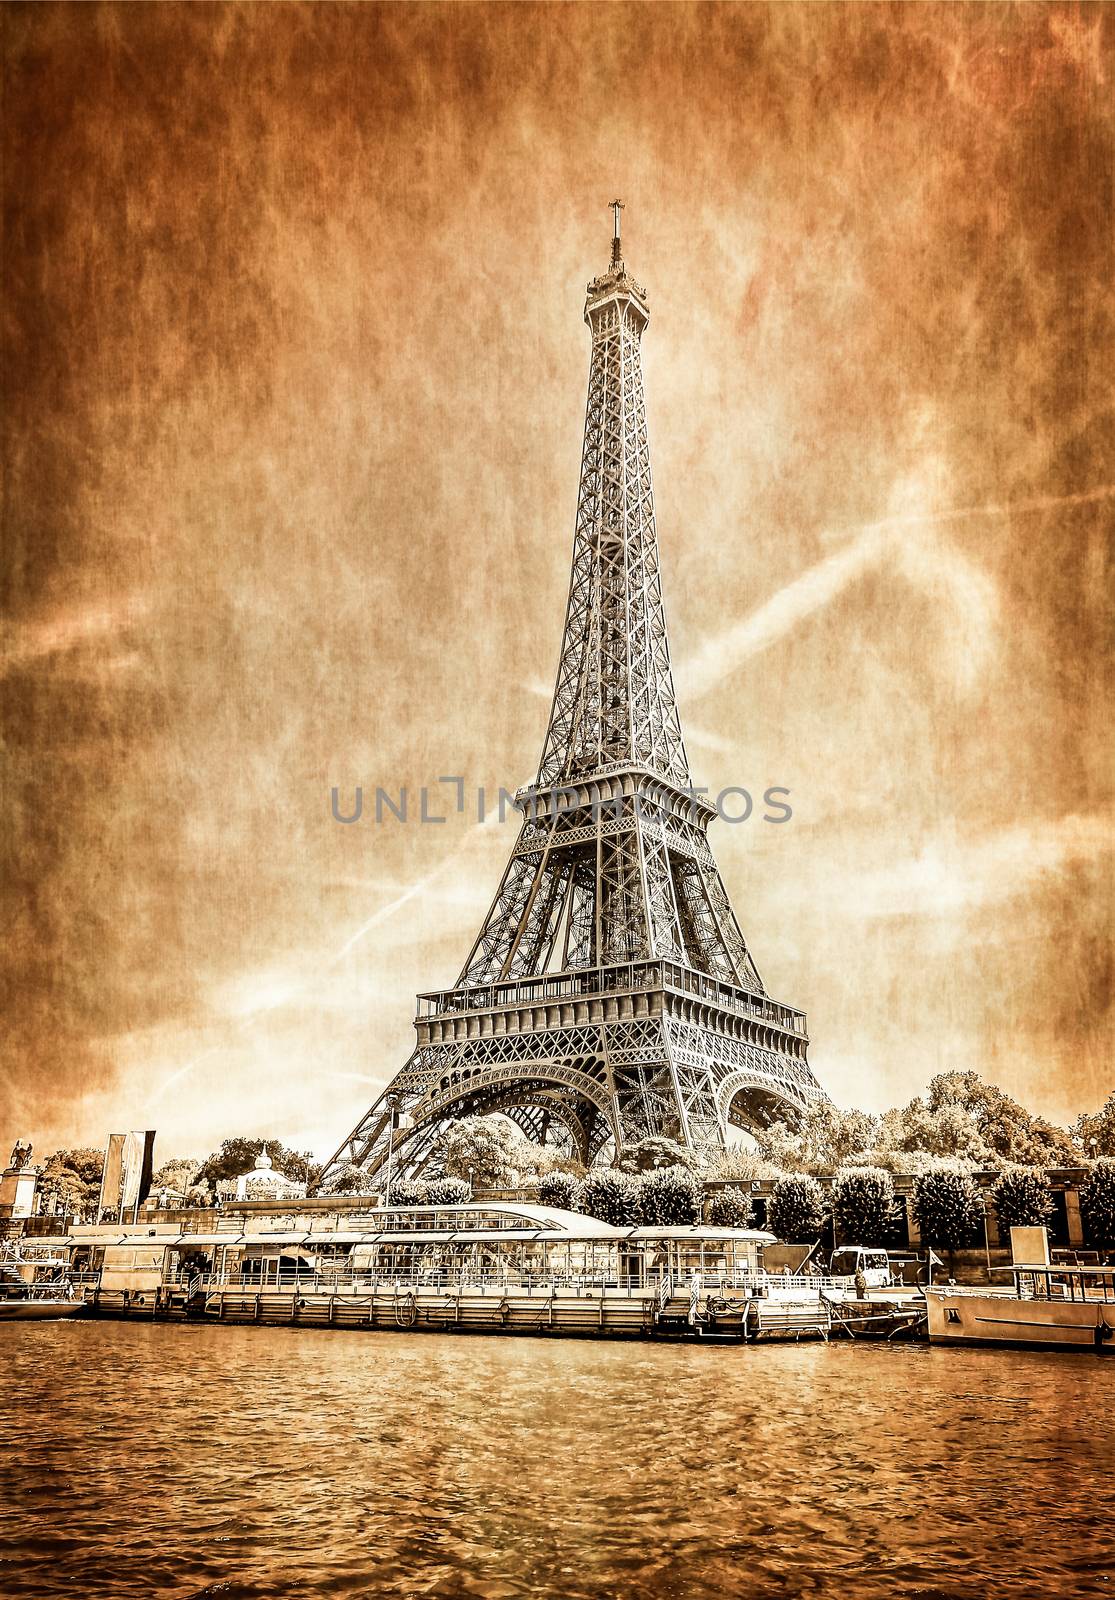 View of Eiffel tower in vintage filtered and textured style by martinm303